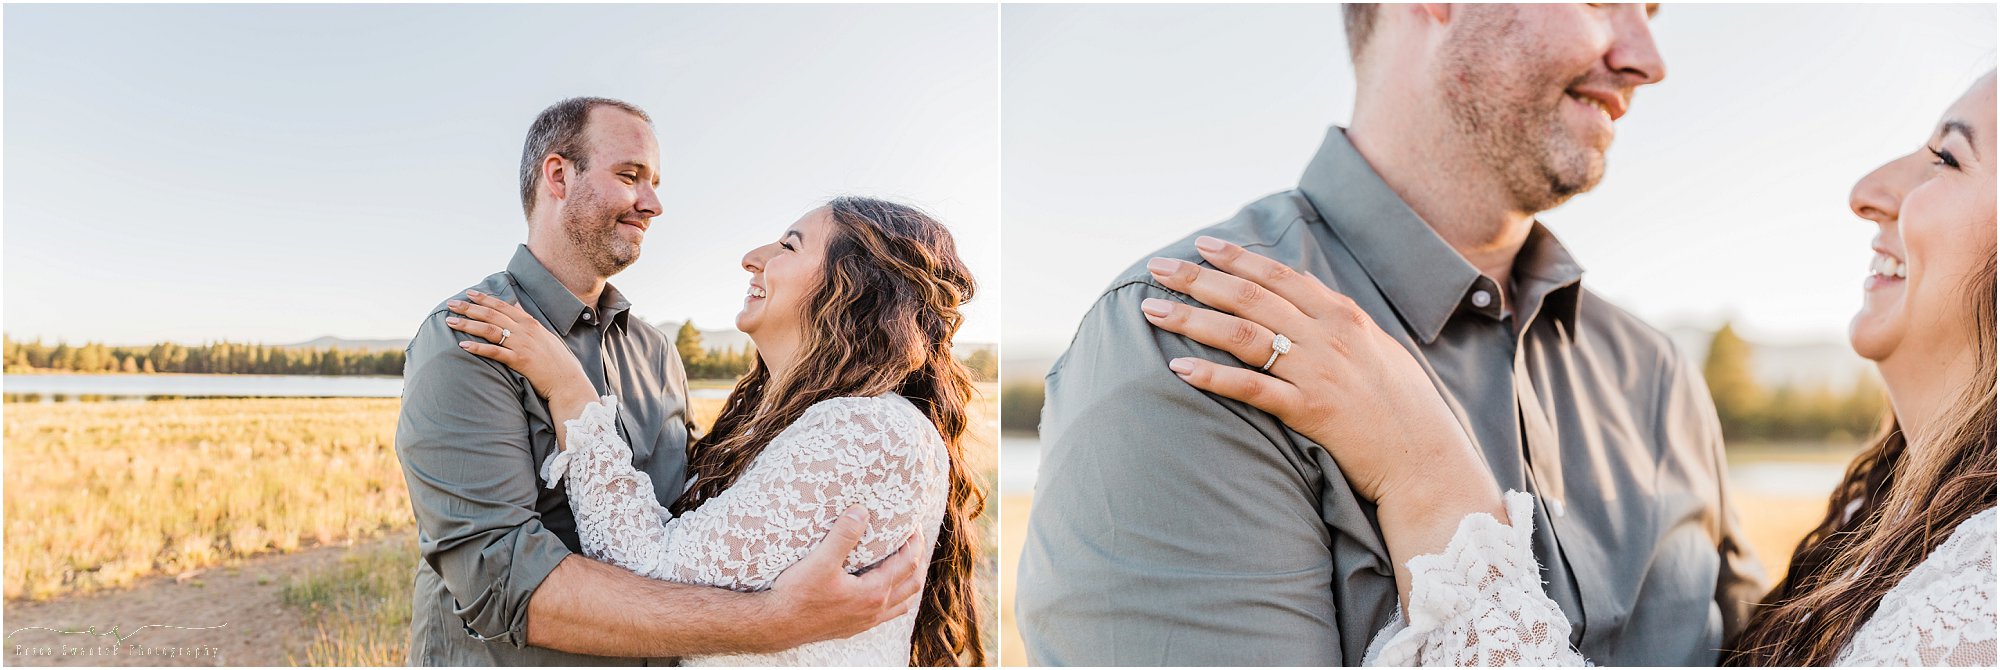 A gorgeous diamond engagement ring from this Tumalo Falls engagement photos session near Bend, OR. | Erica Swantek Photography.